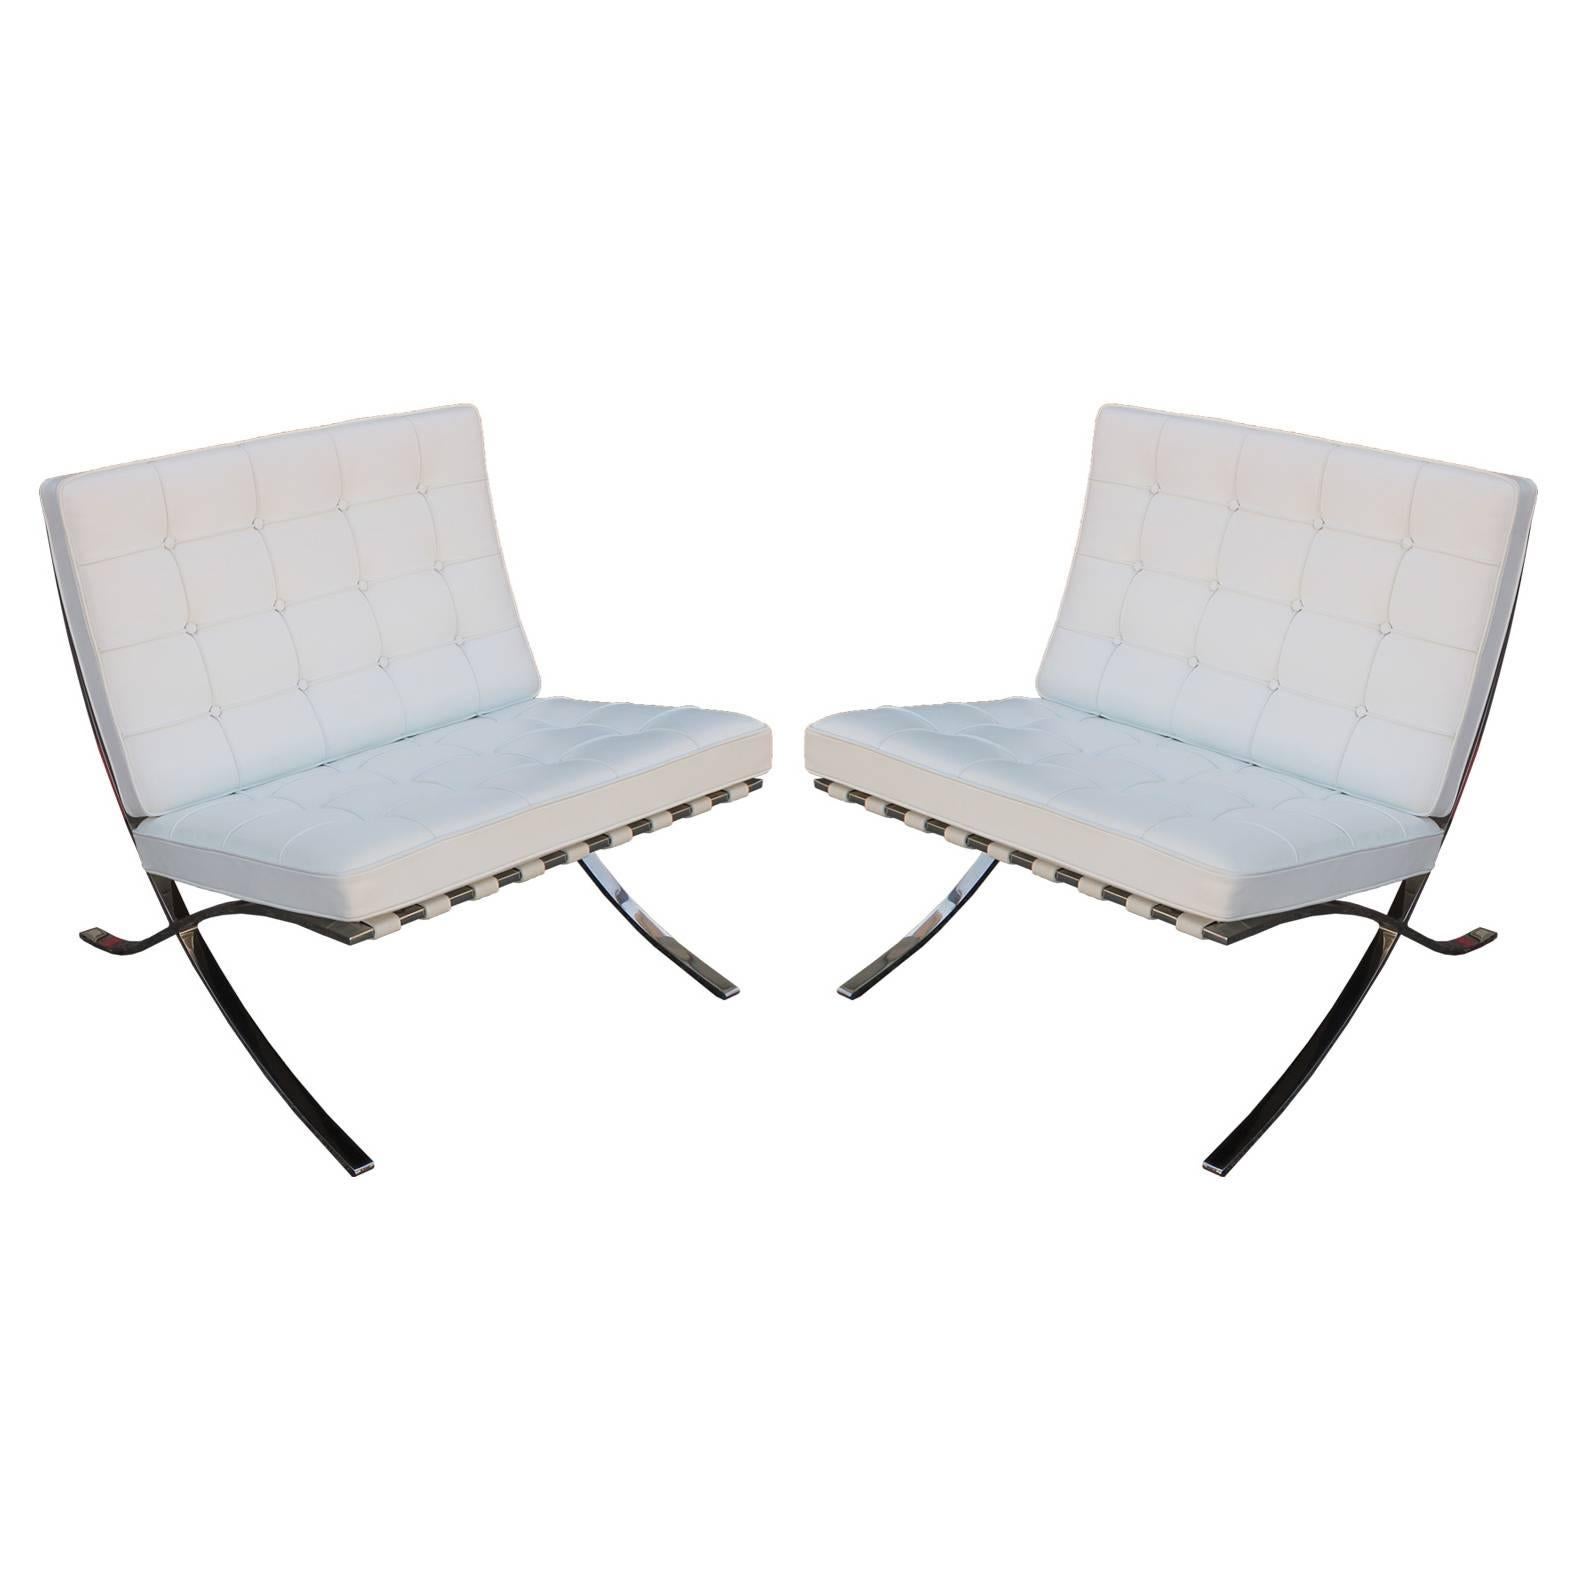 Iconic Pair of Mies van der Rohe Barcelona Chairs in White Leather